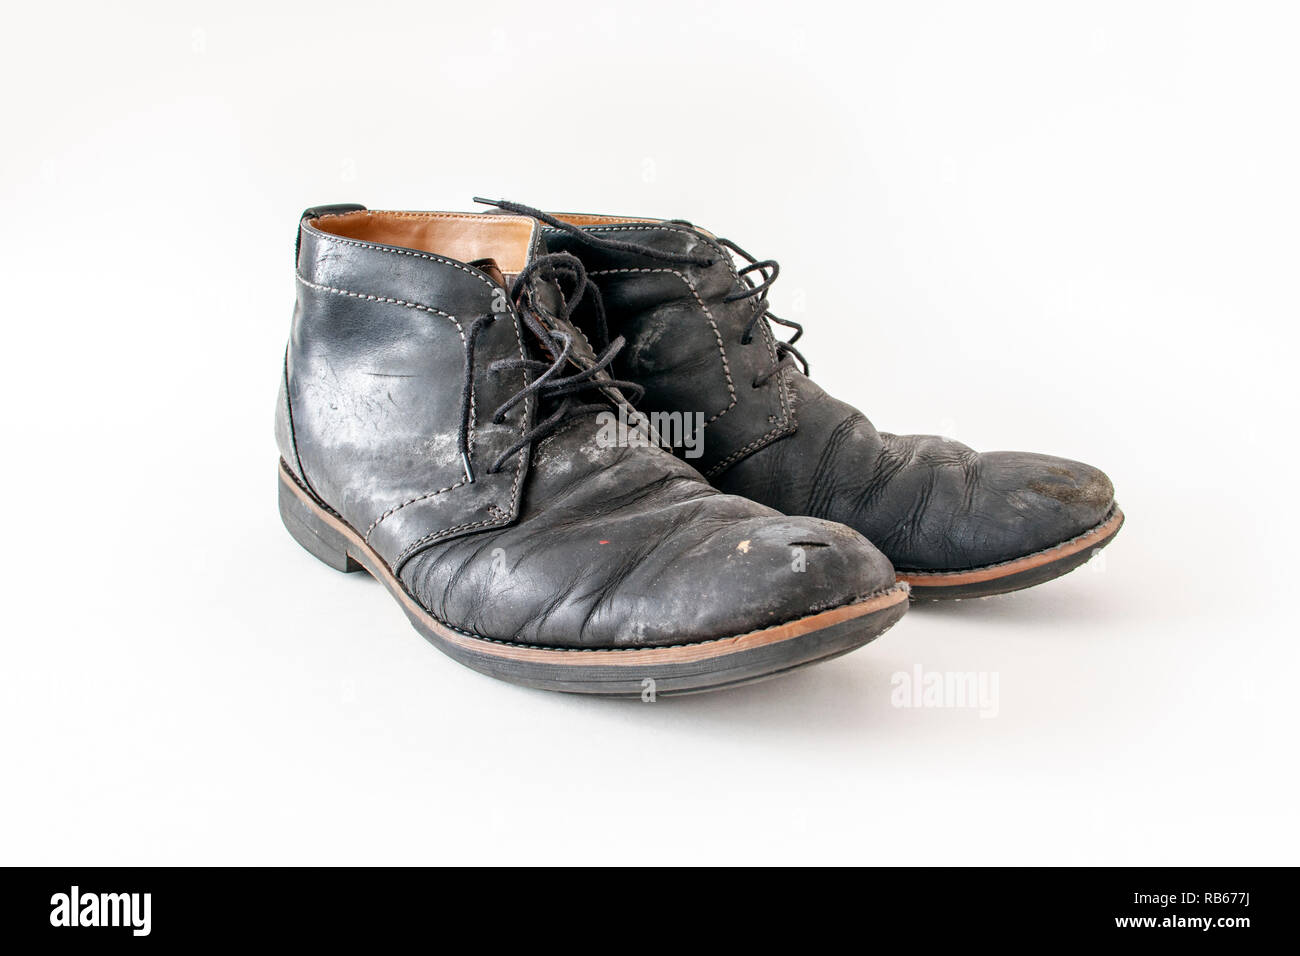 A pair of old tattered black leather lace-up shoes with water stains Stock Photo